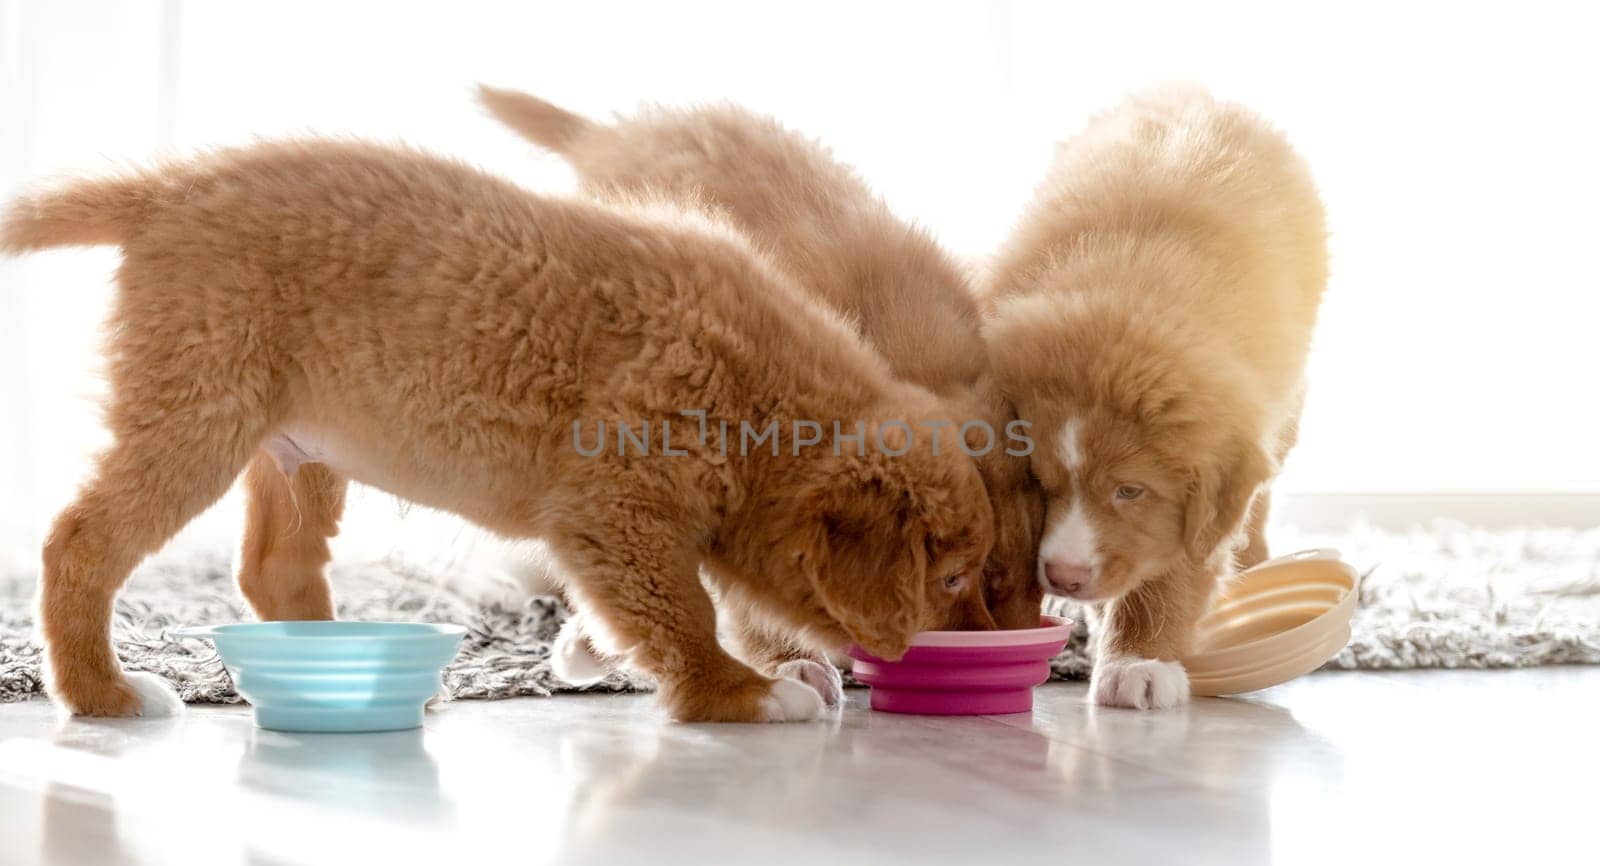 Three Toller Puppies Eat Food From One Bowl At Home by tan4ikk1